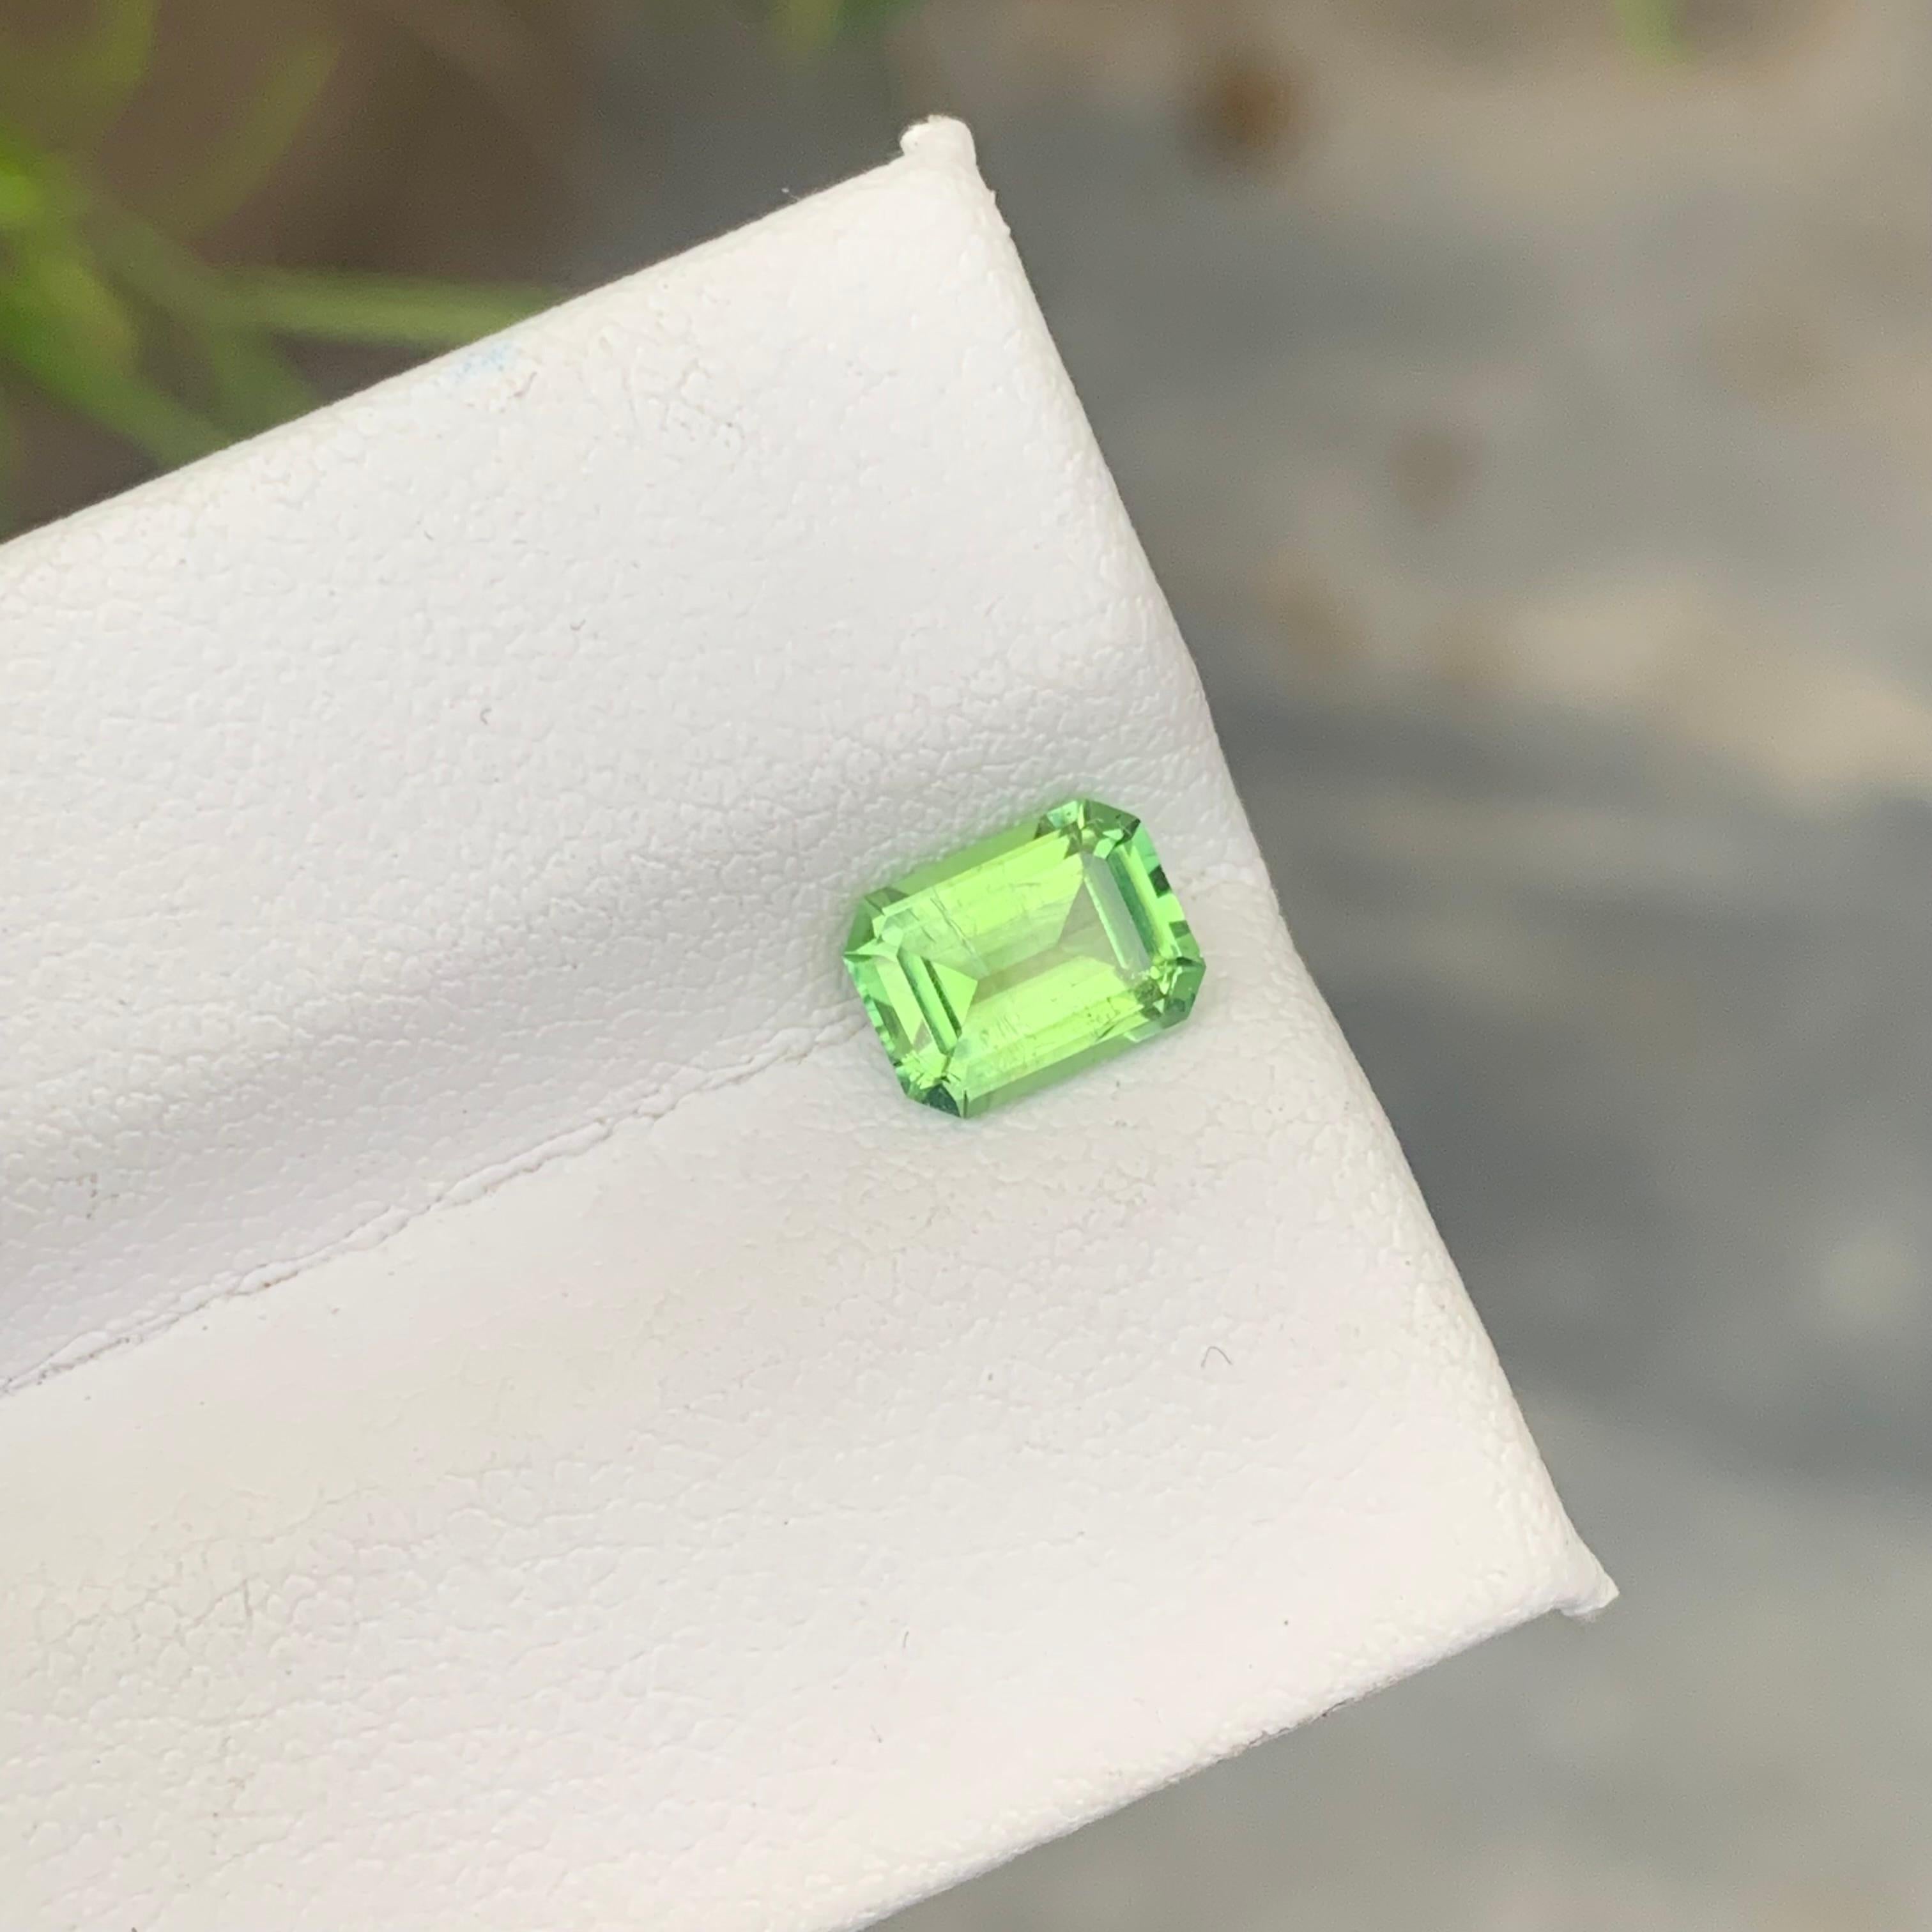 0.95 Carat Natural Loose Green Afghani Tourmaline Emerald Cut Gemstone for Ring For Sale 7